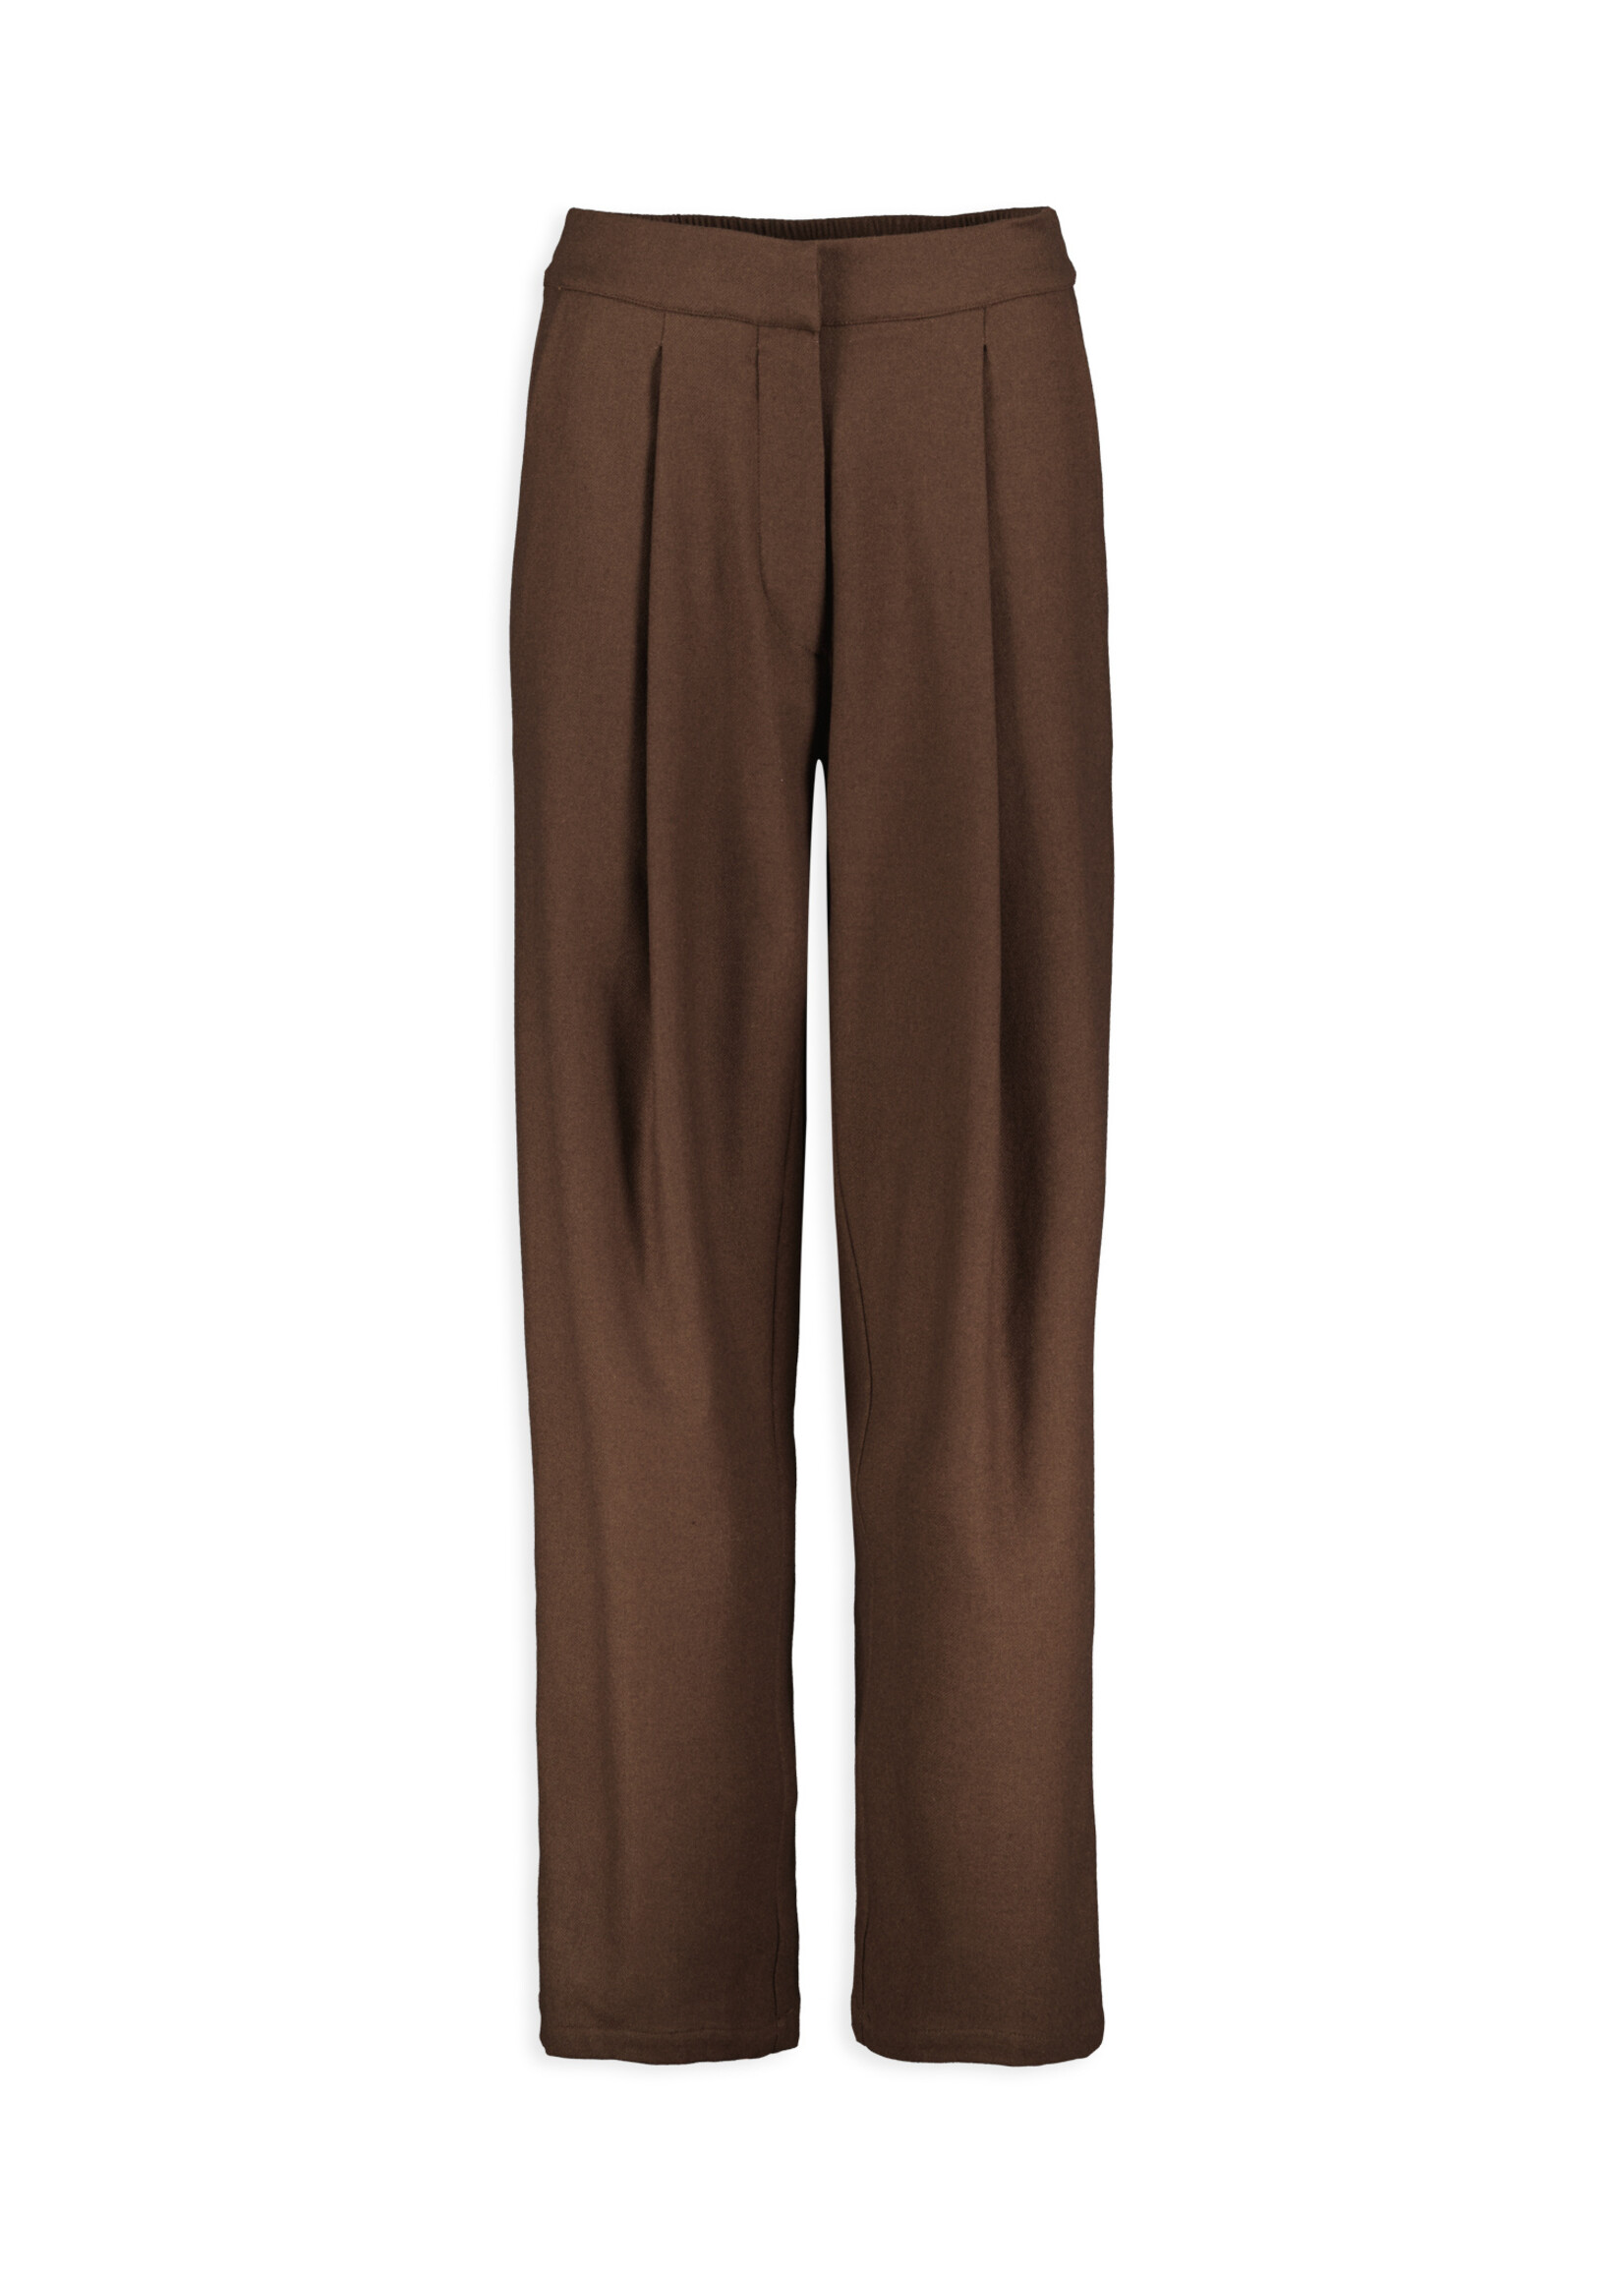 Humanoid Rocco Trousers